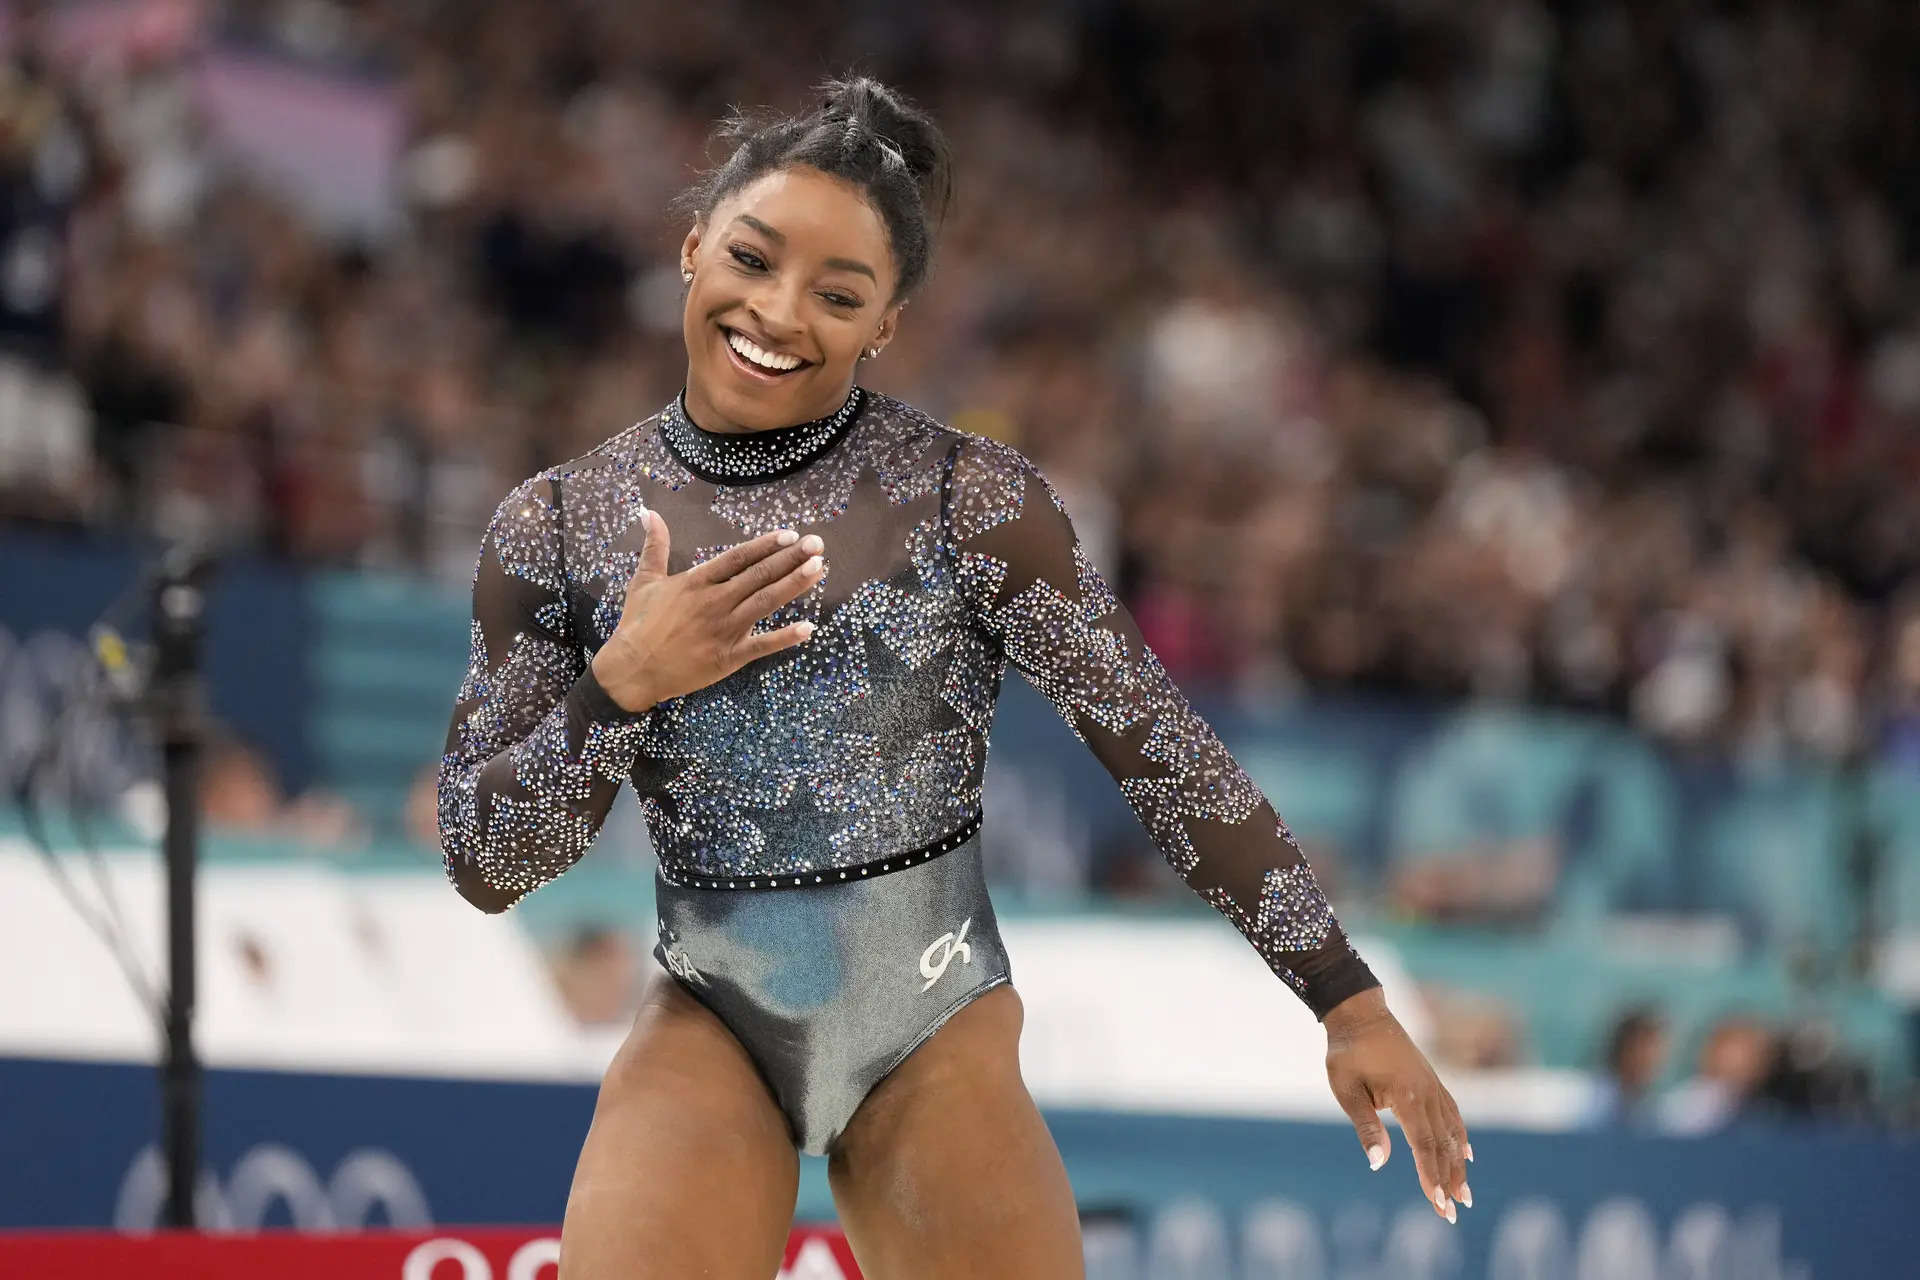 Simone Biles shakes off a calf injury to dominate during Olympic gymnastics qualifying 